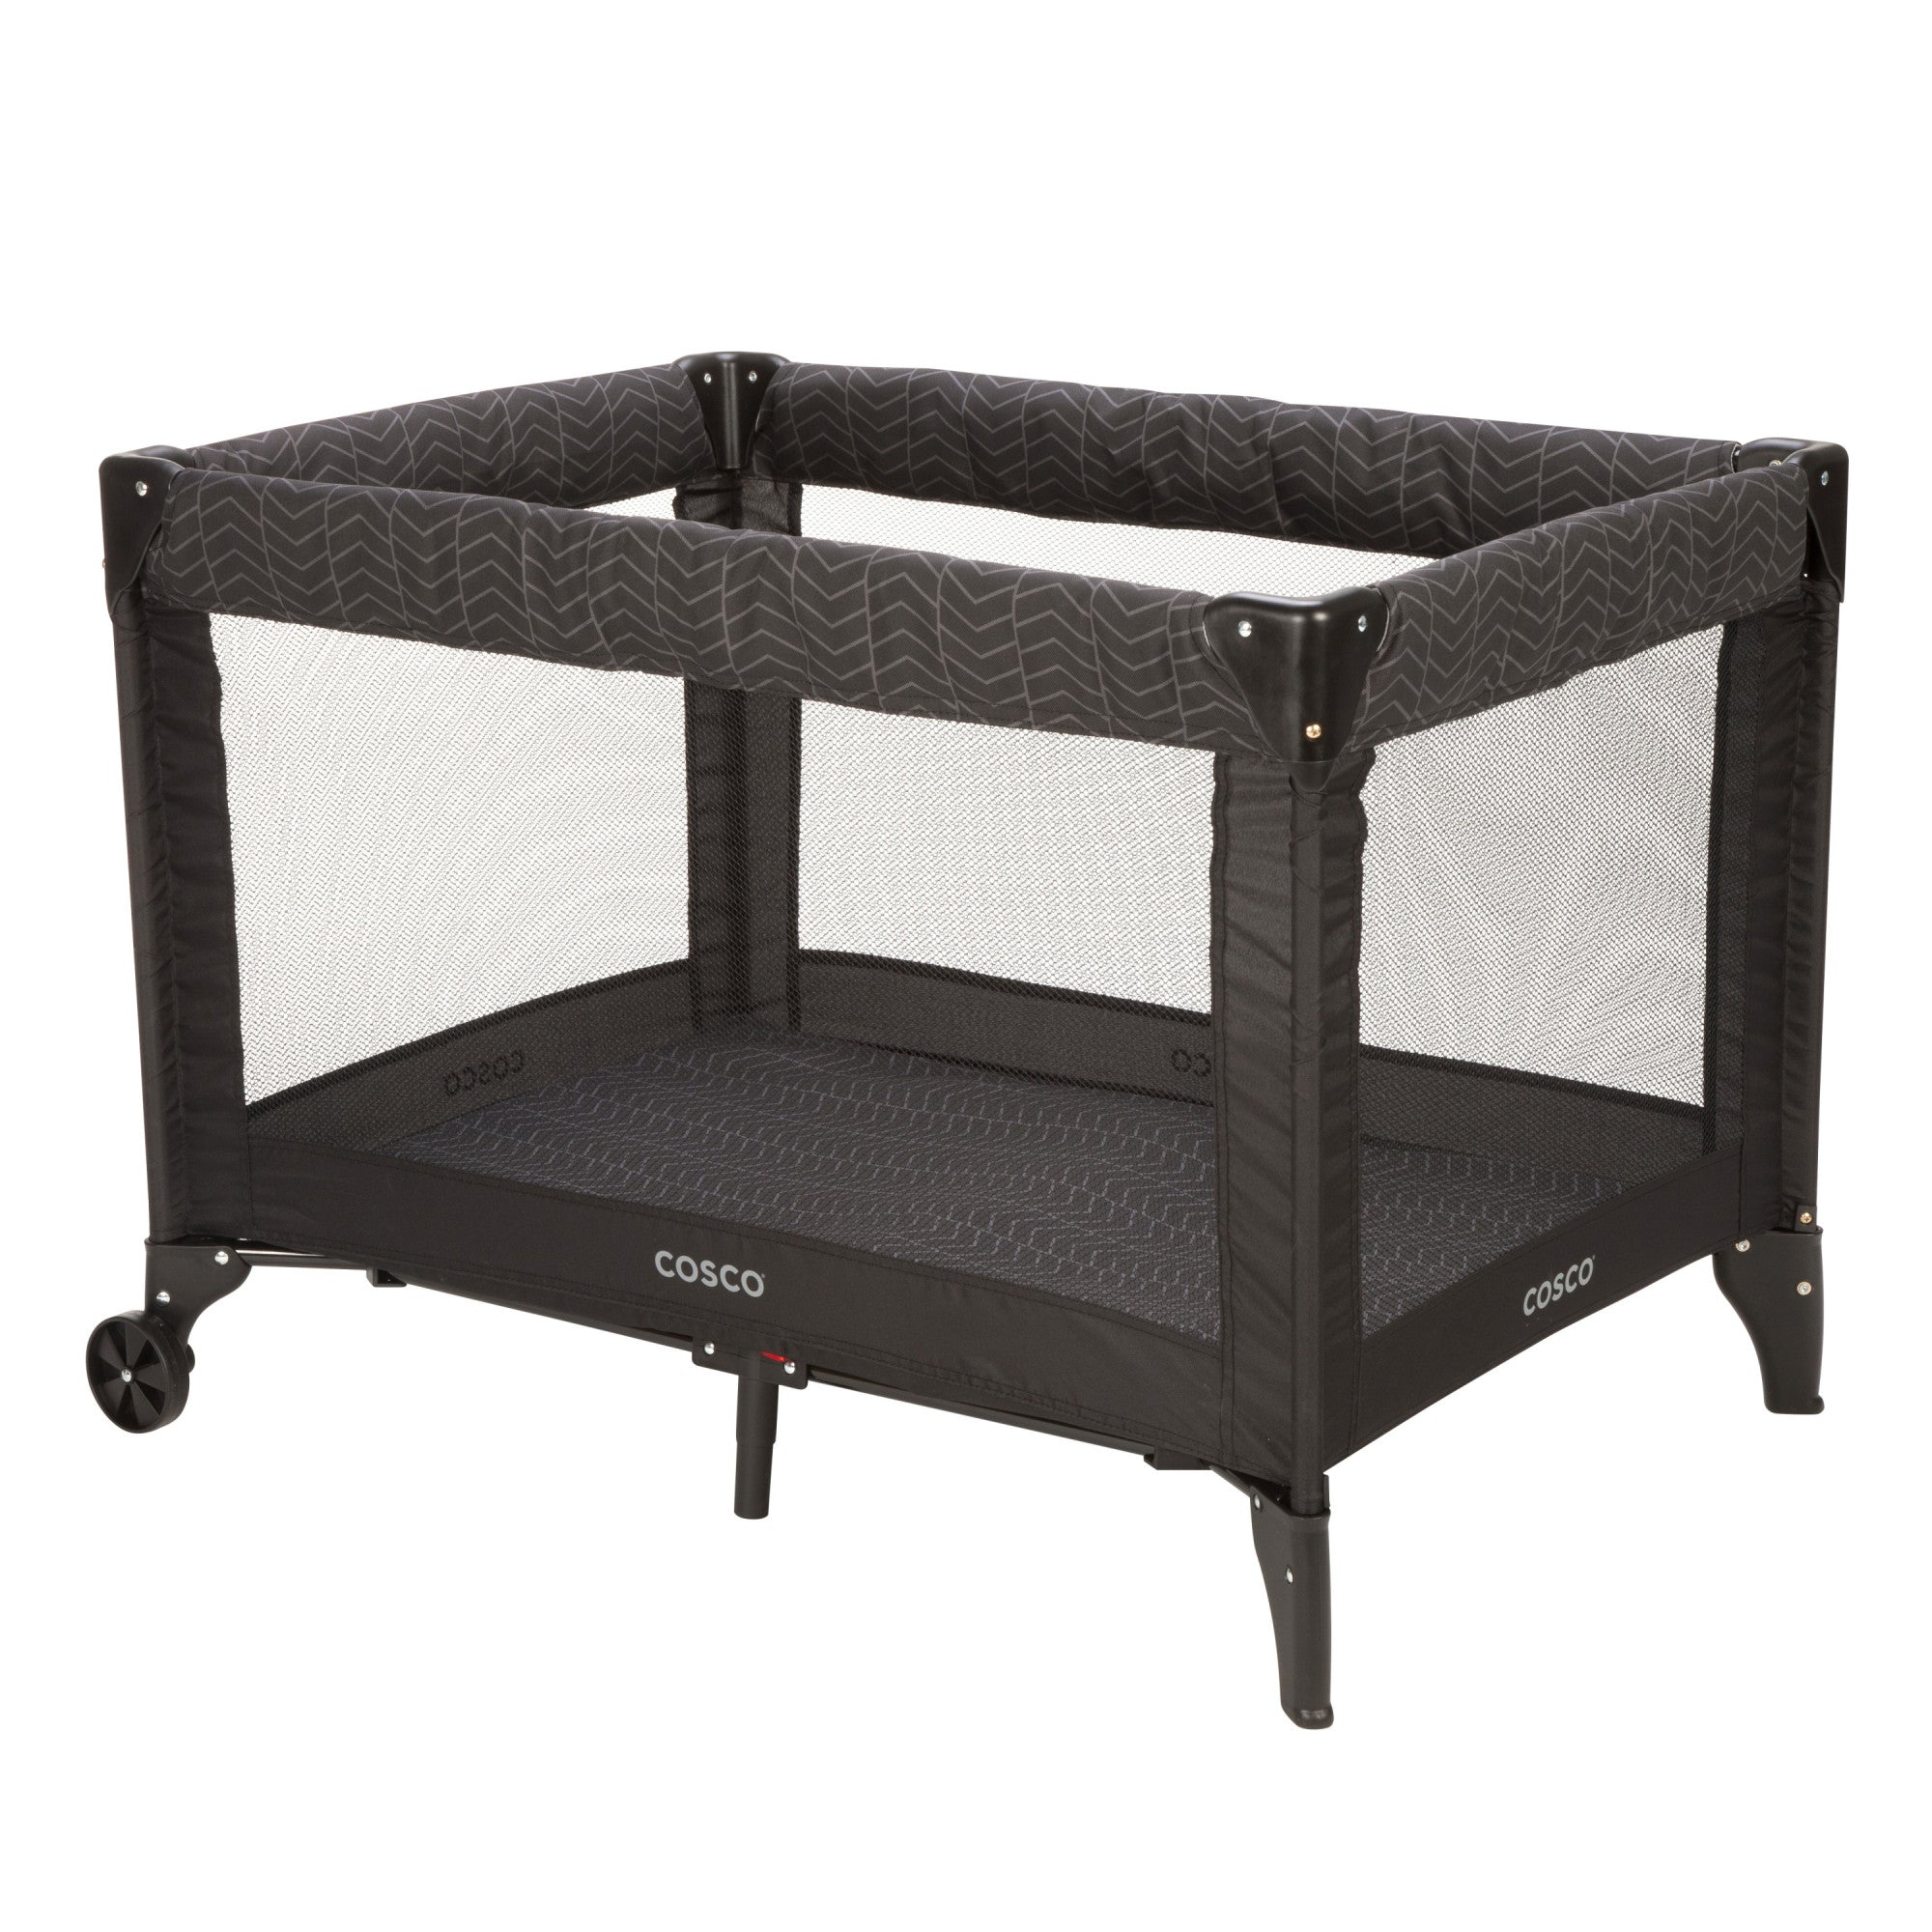 Deluxe Funsport® Portable Compact Play Yard - Black Arrows